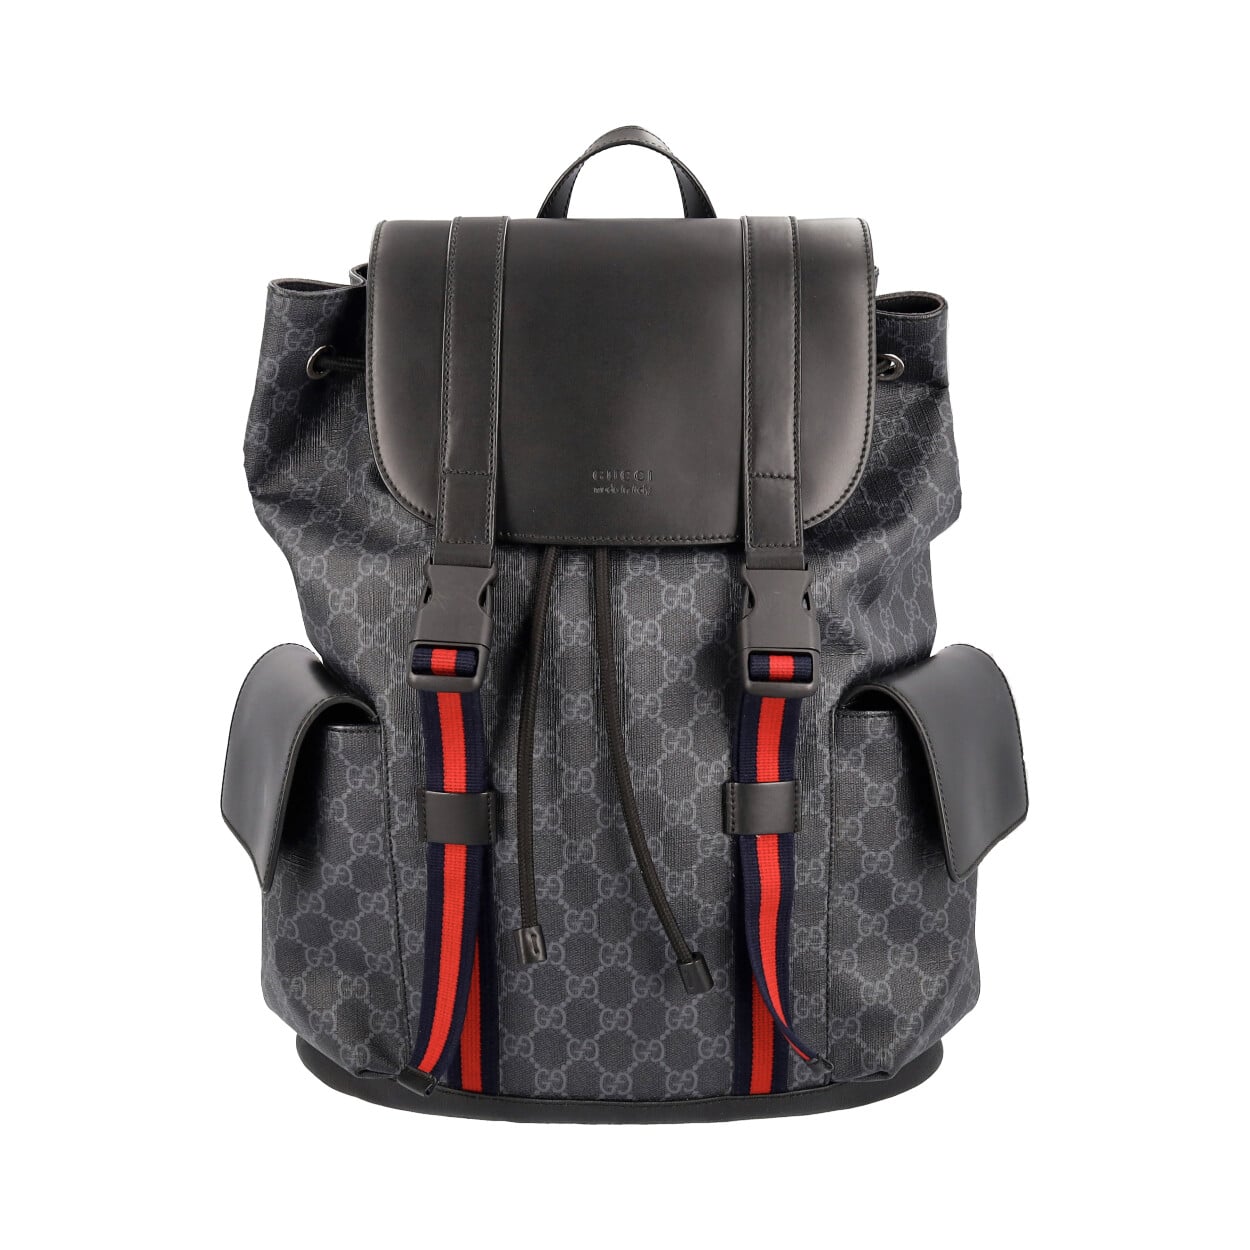 GUCCI GG Supreme Backpack Black/Grey | Luxity